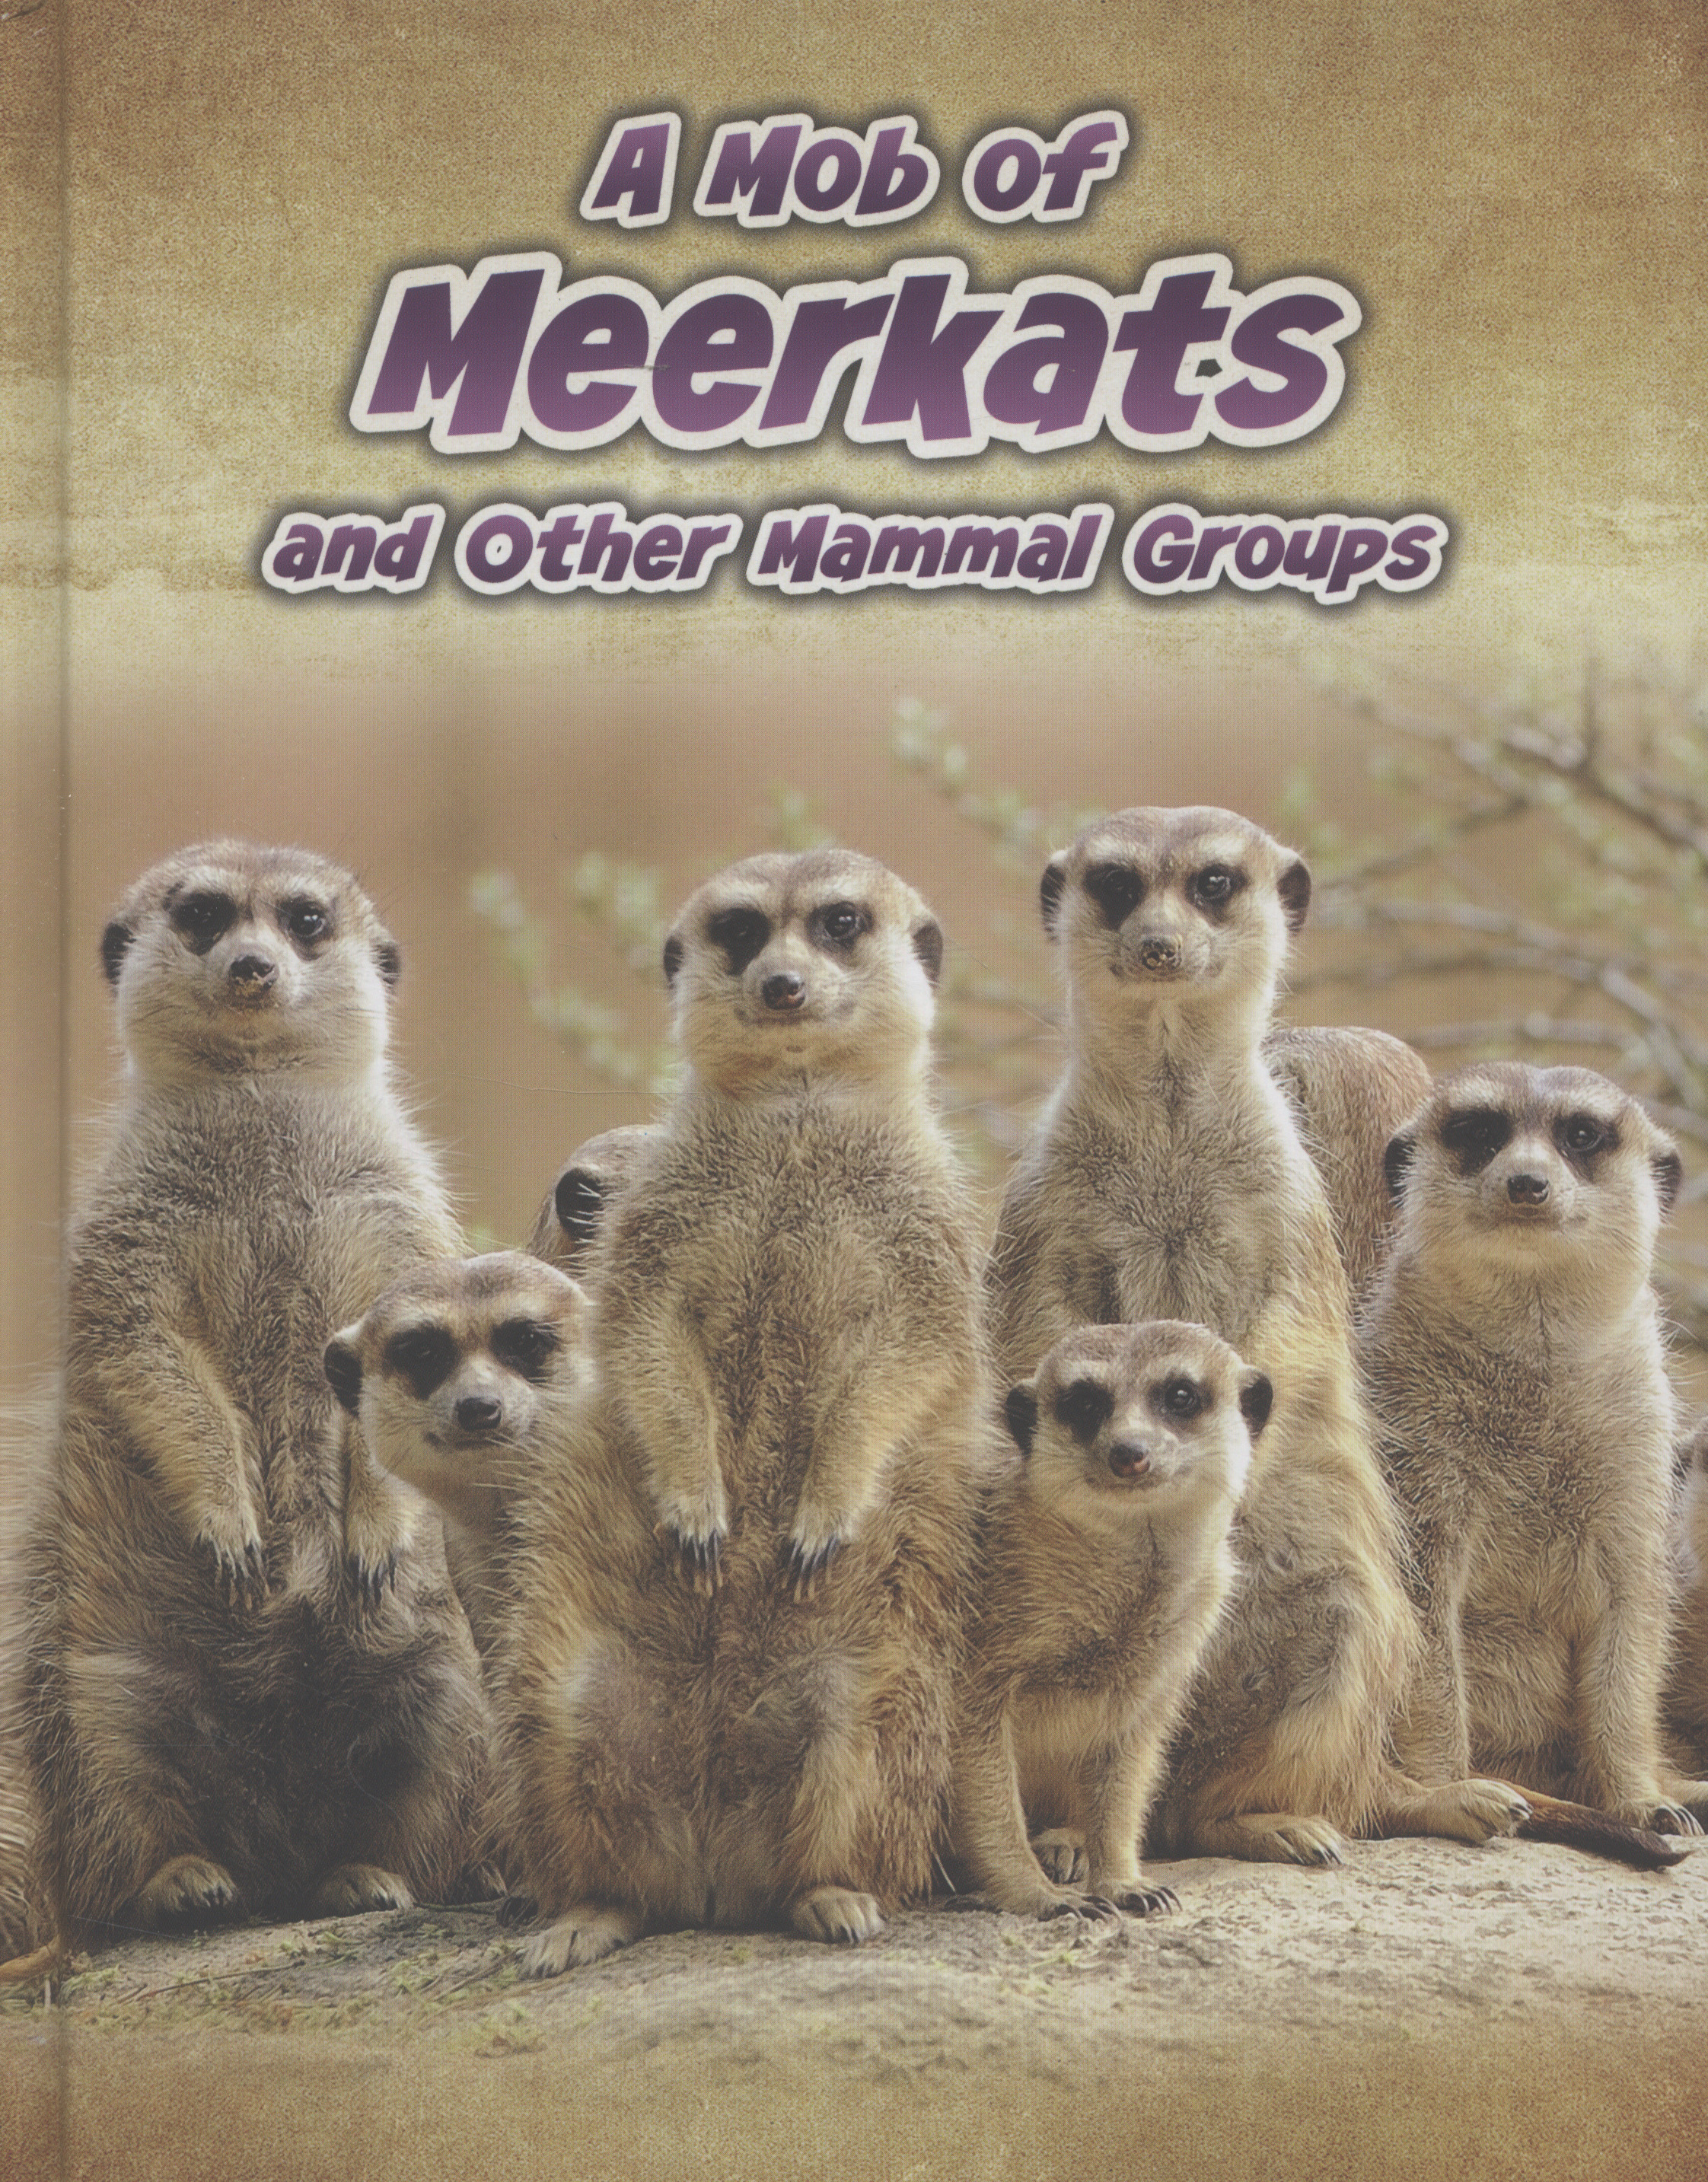 A mob of meerkats and other animal groups